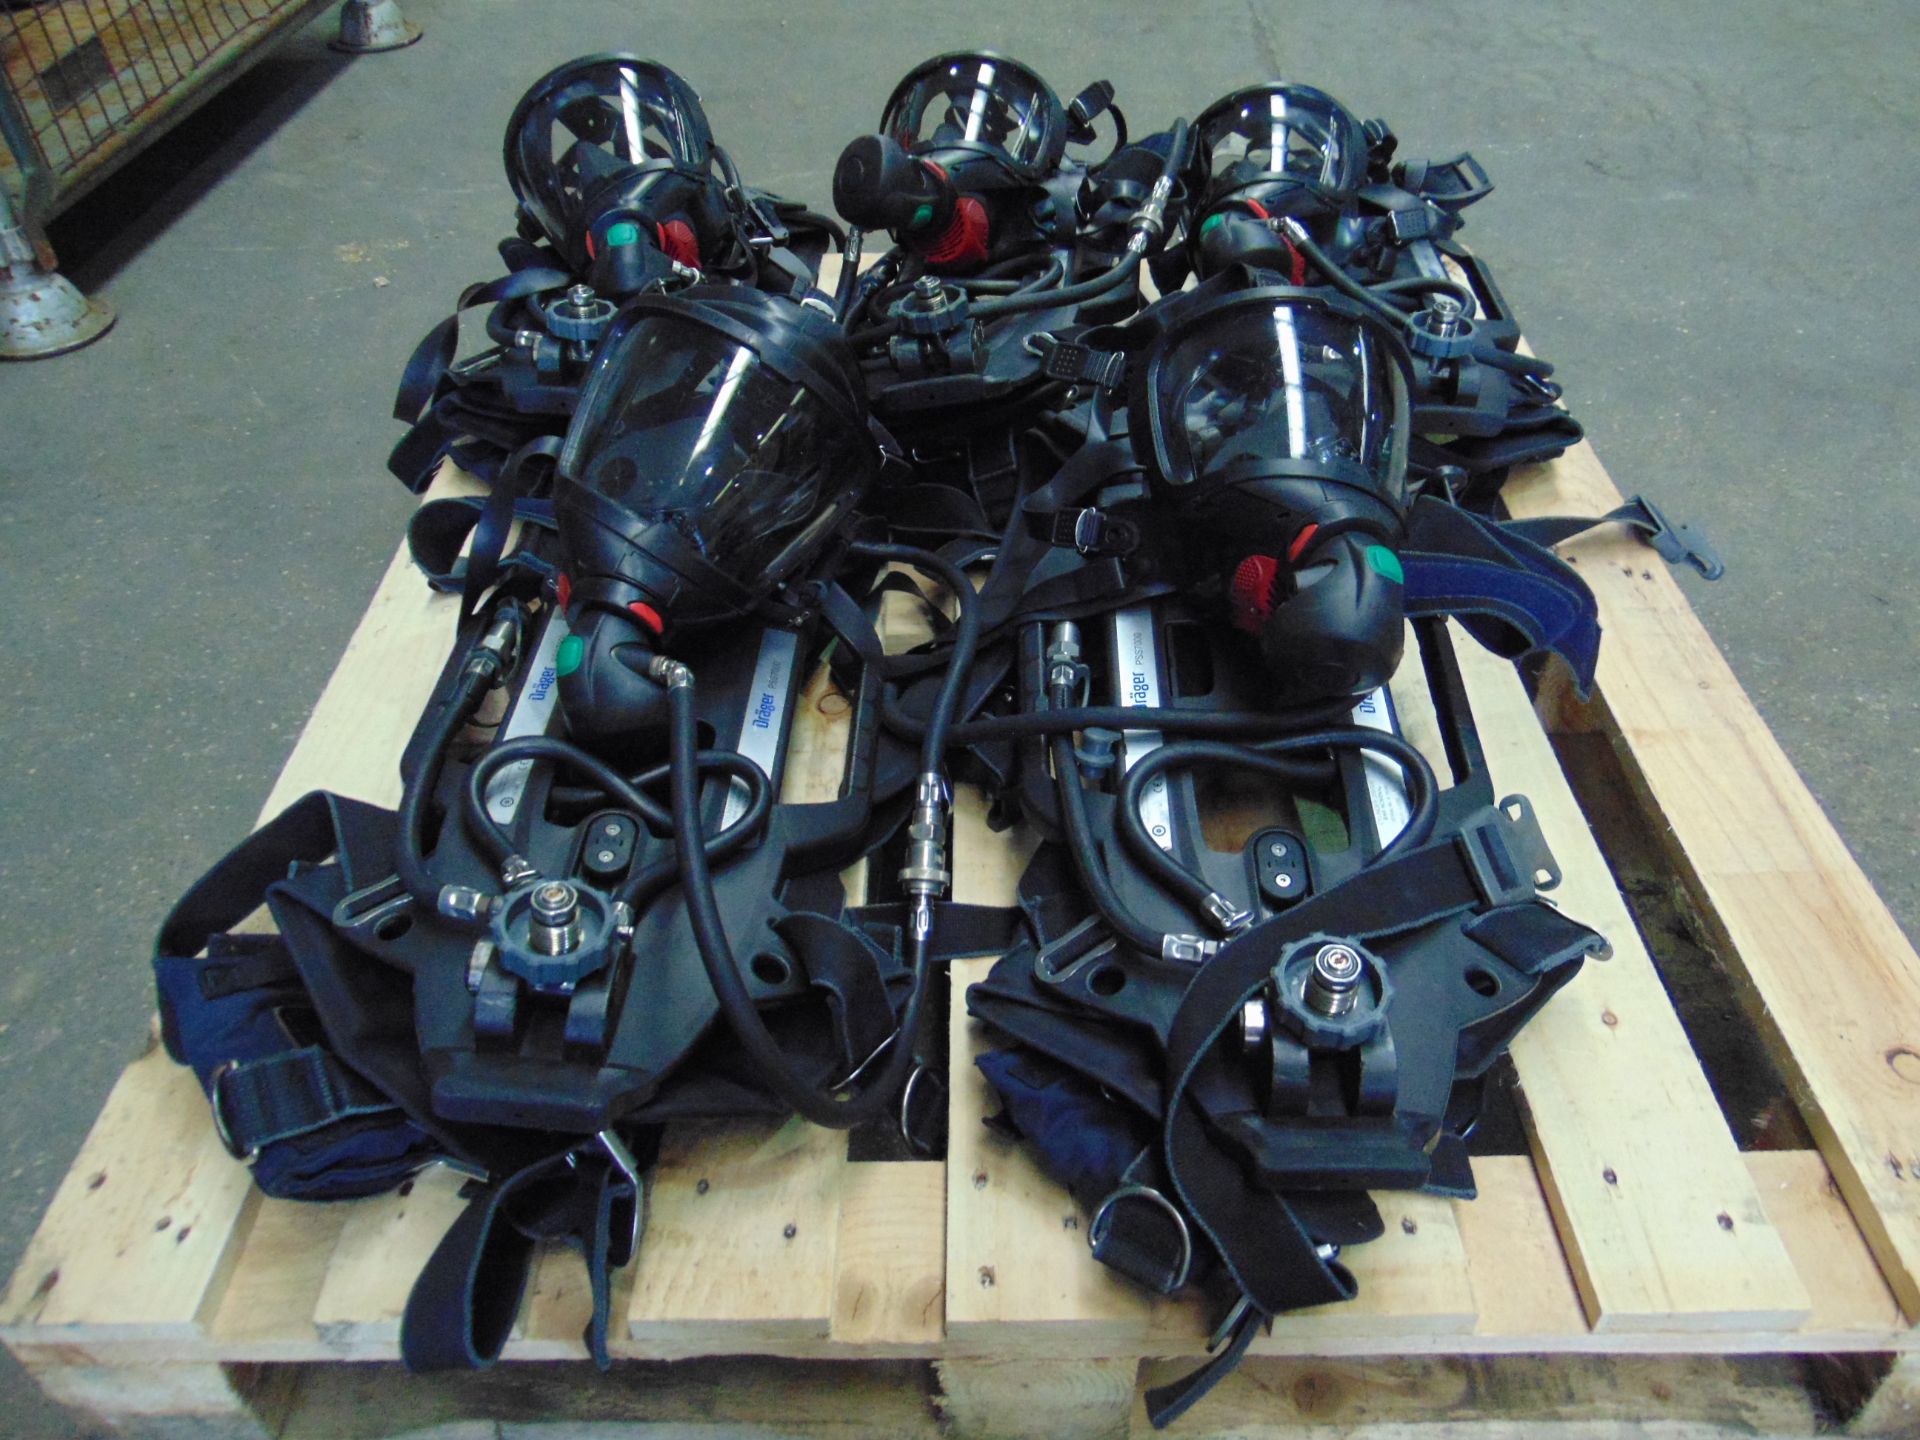 5 x Drager PSS 7000 Self Contained Breathing Apparatus w/ 10 x Drager 300 Bar Air Cylinders - Image 10 of 22